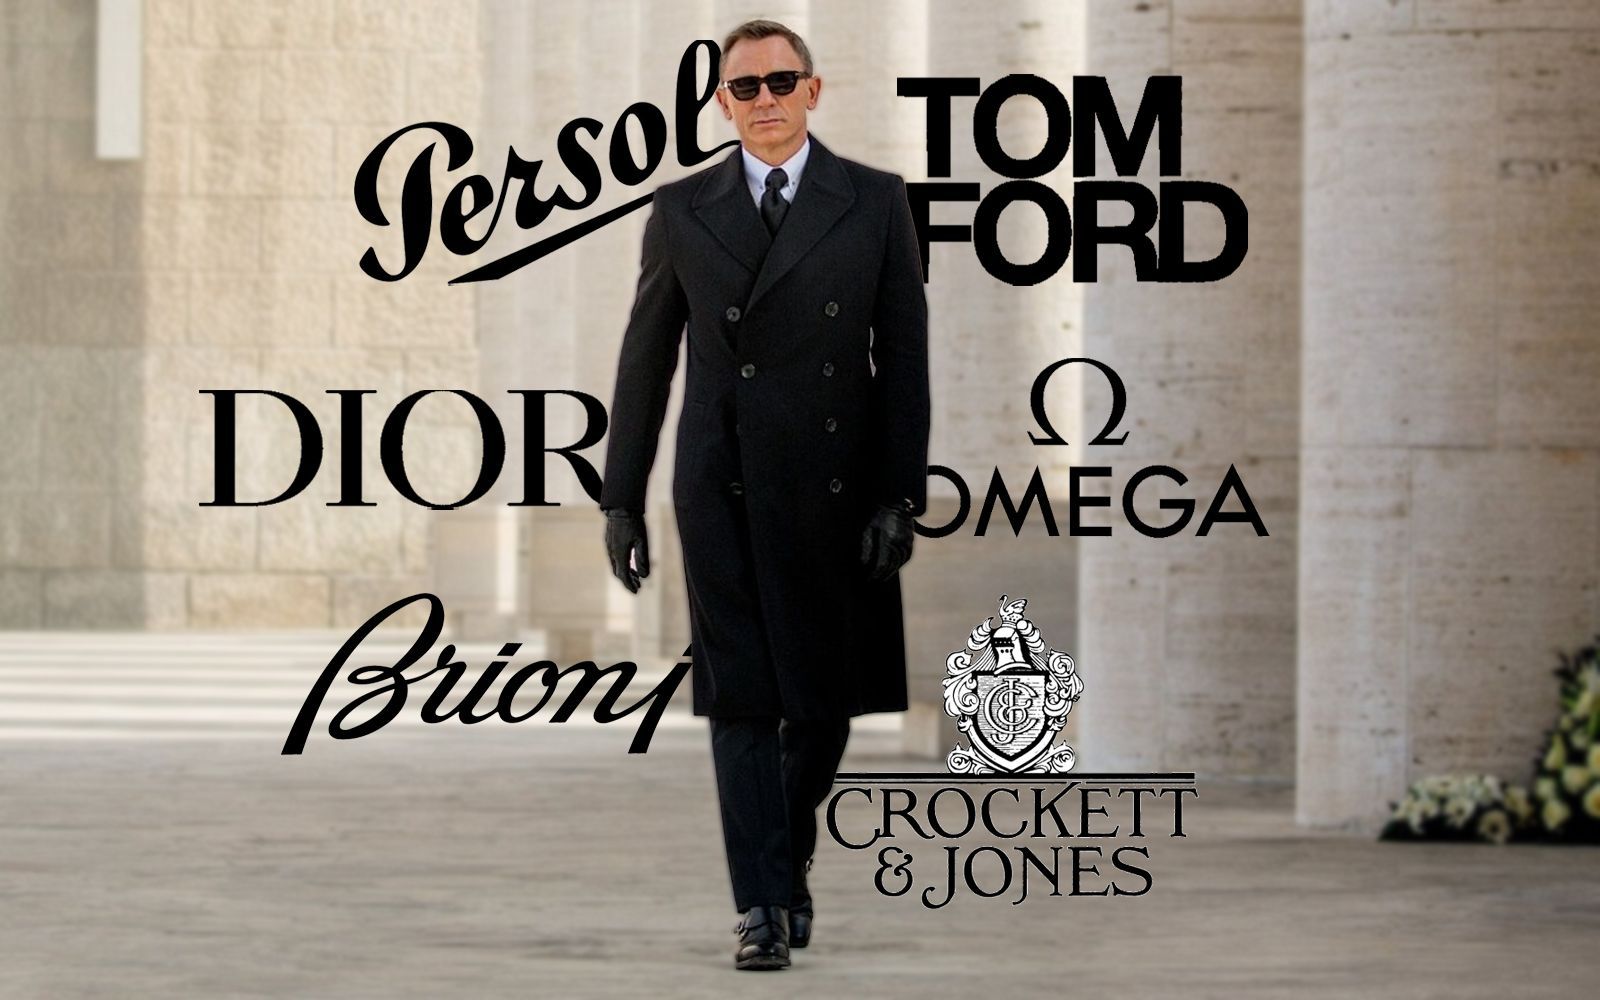 What are James Bond's favorite brands?